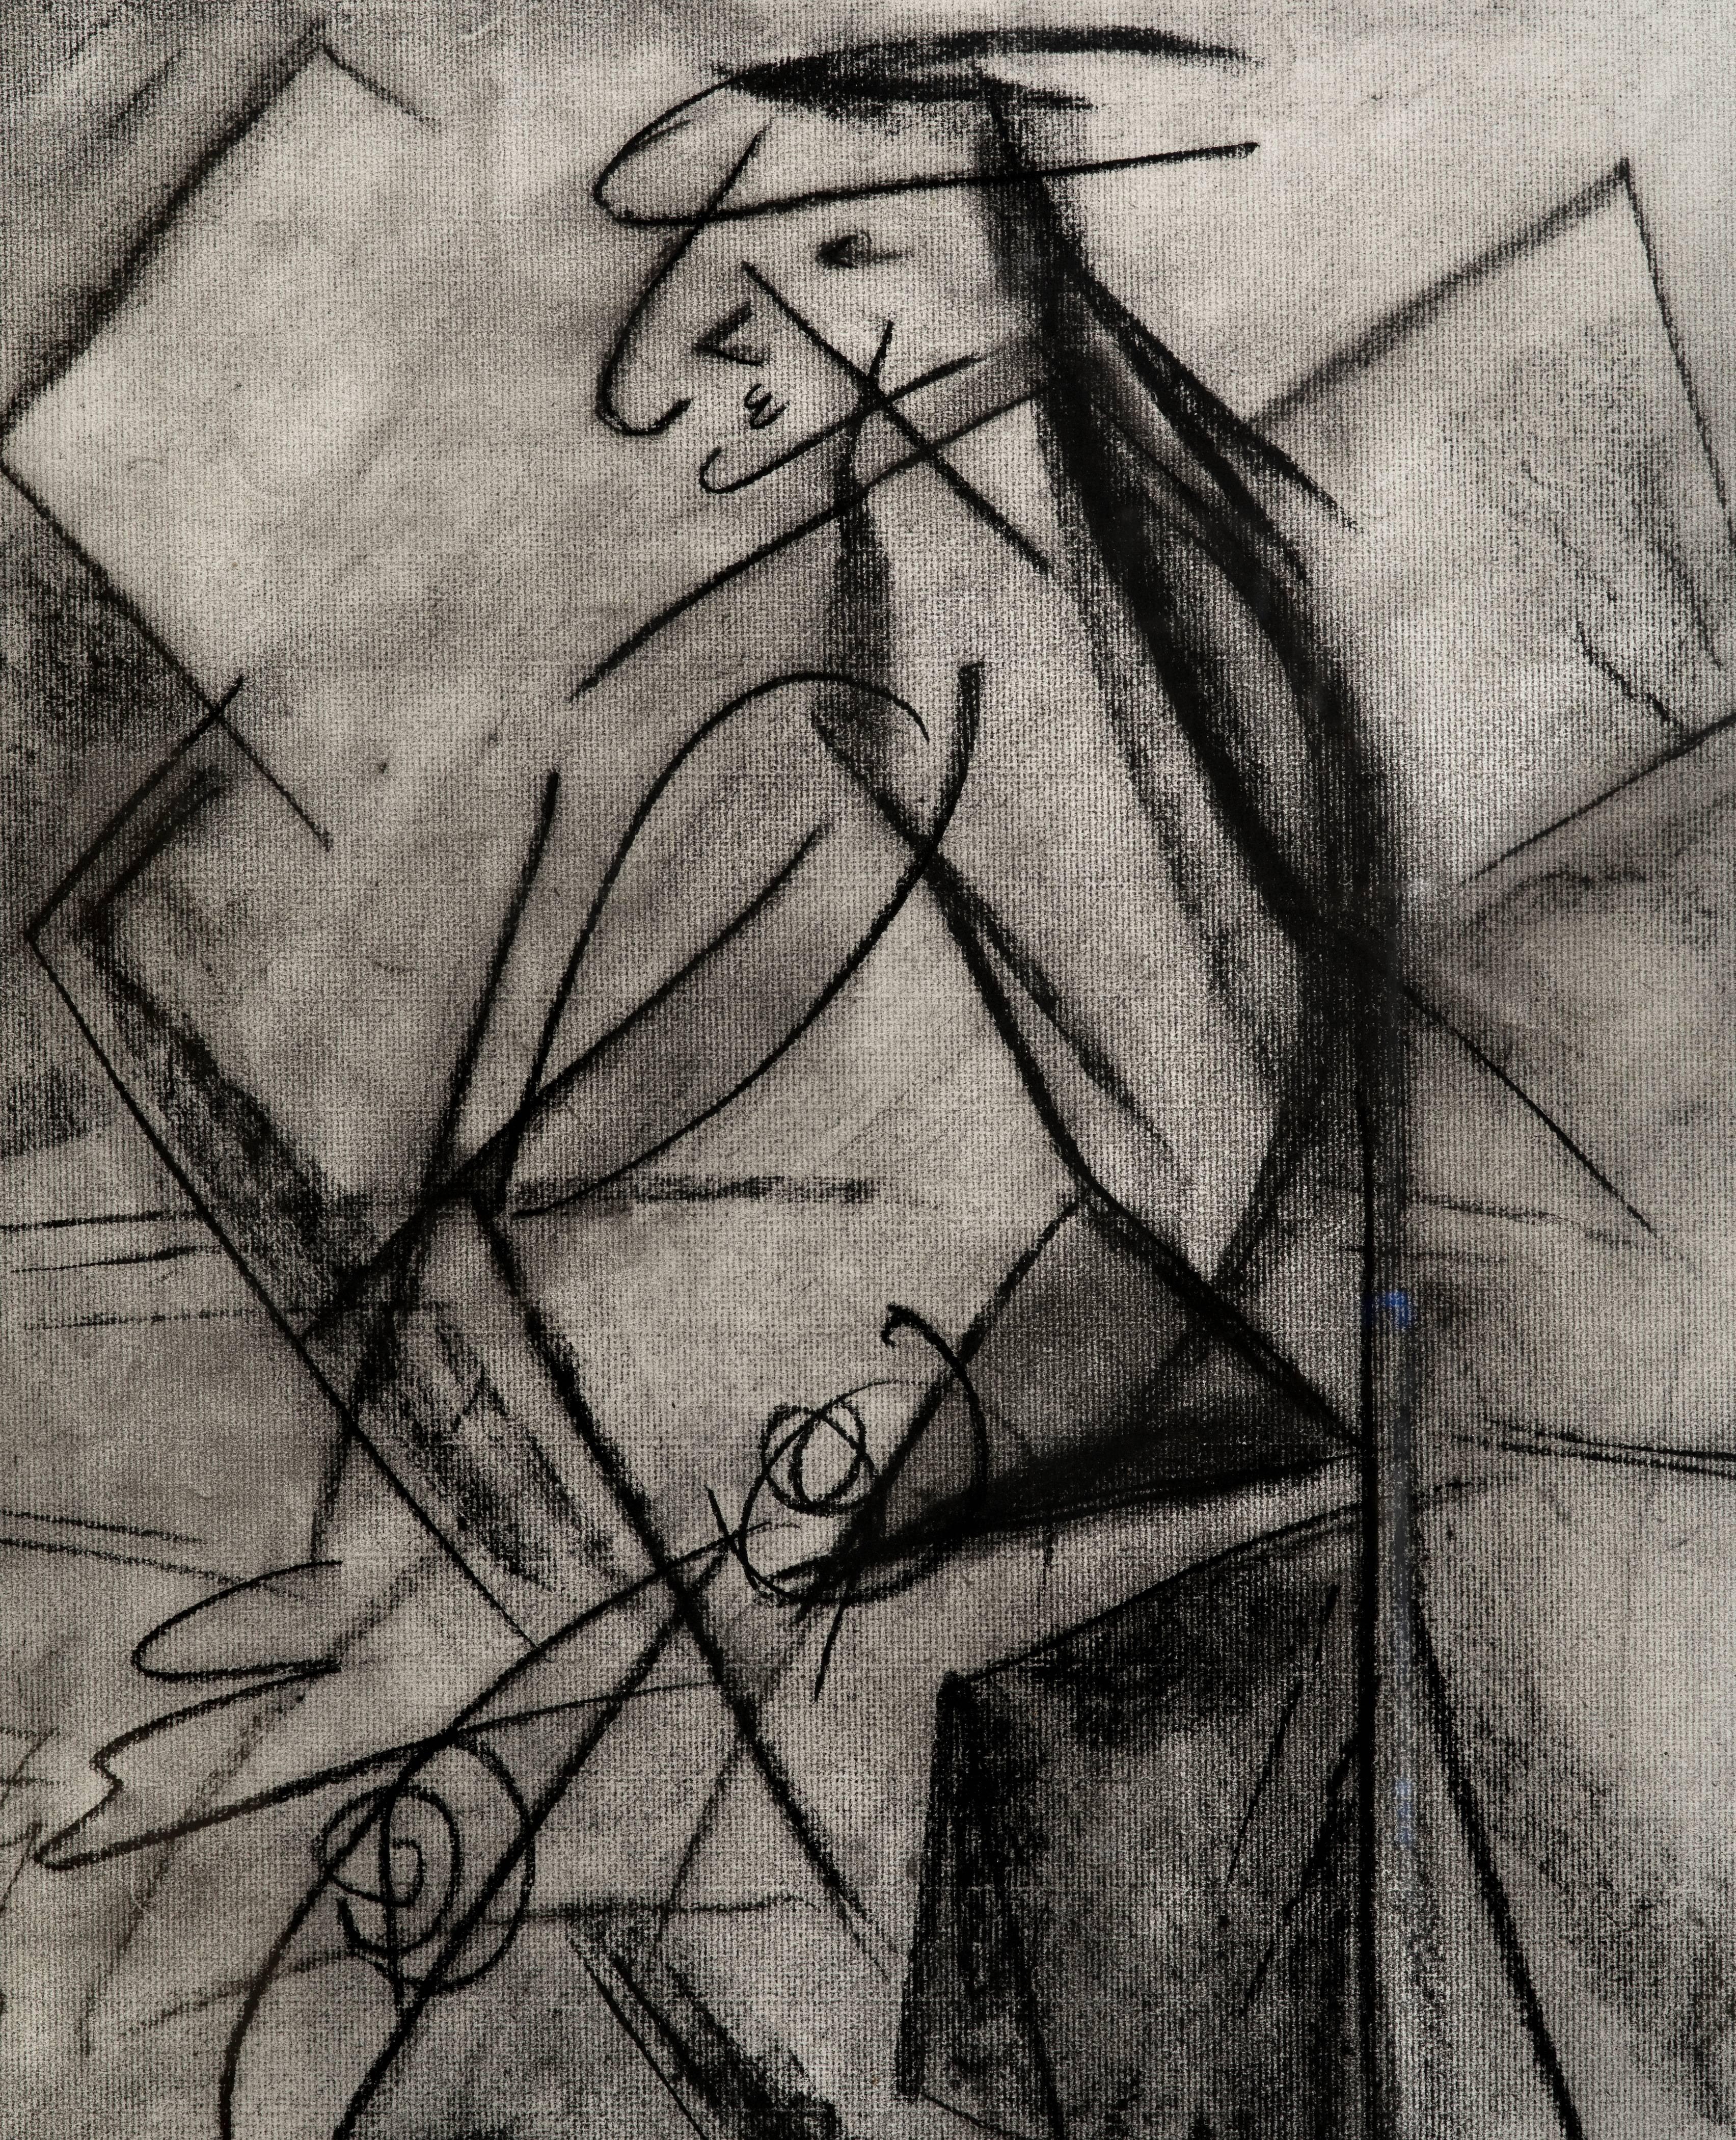 Fabulous Bauhaus charcoal figural drawing on paper circa 1945 by Louis Atlas (1918-1966) found in a period distressed frame. He was a former student of Hans Hofmann.  
Signed L. Atlas  NY 45. Great scale!
Image size is 23.50 inches high by 17.25